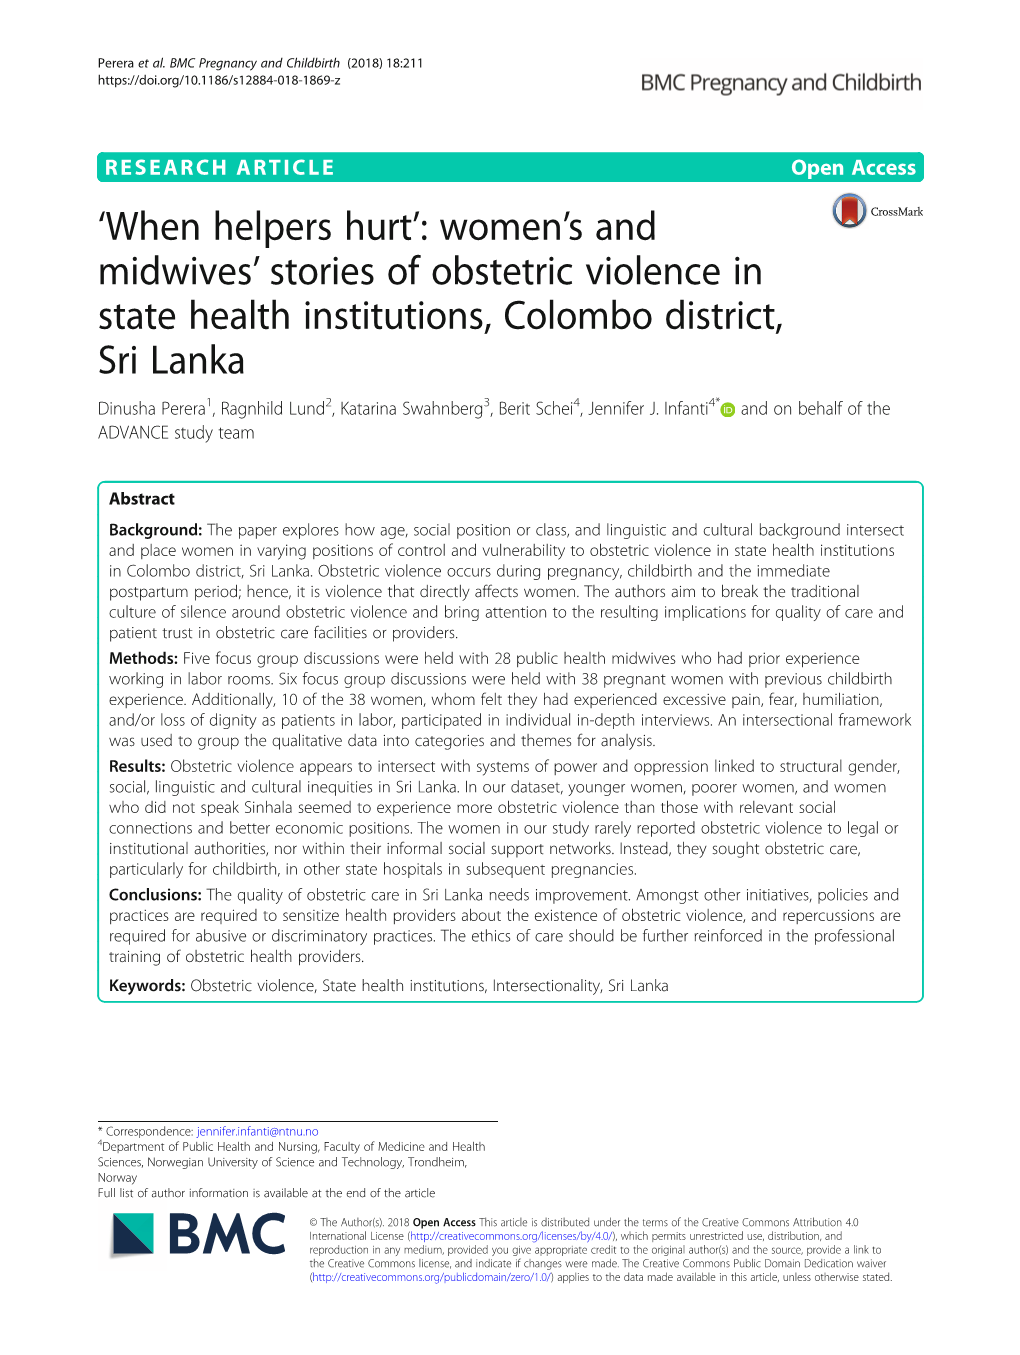 Women's and Midwives' Stories of Obstetric Violence in State Health